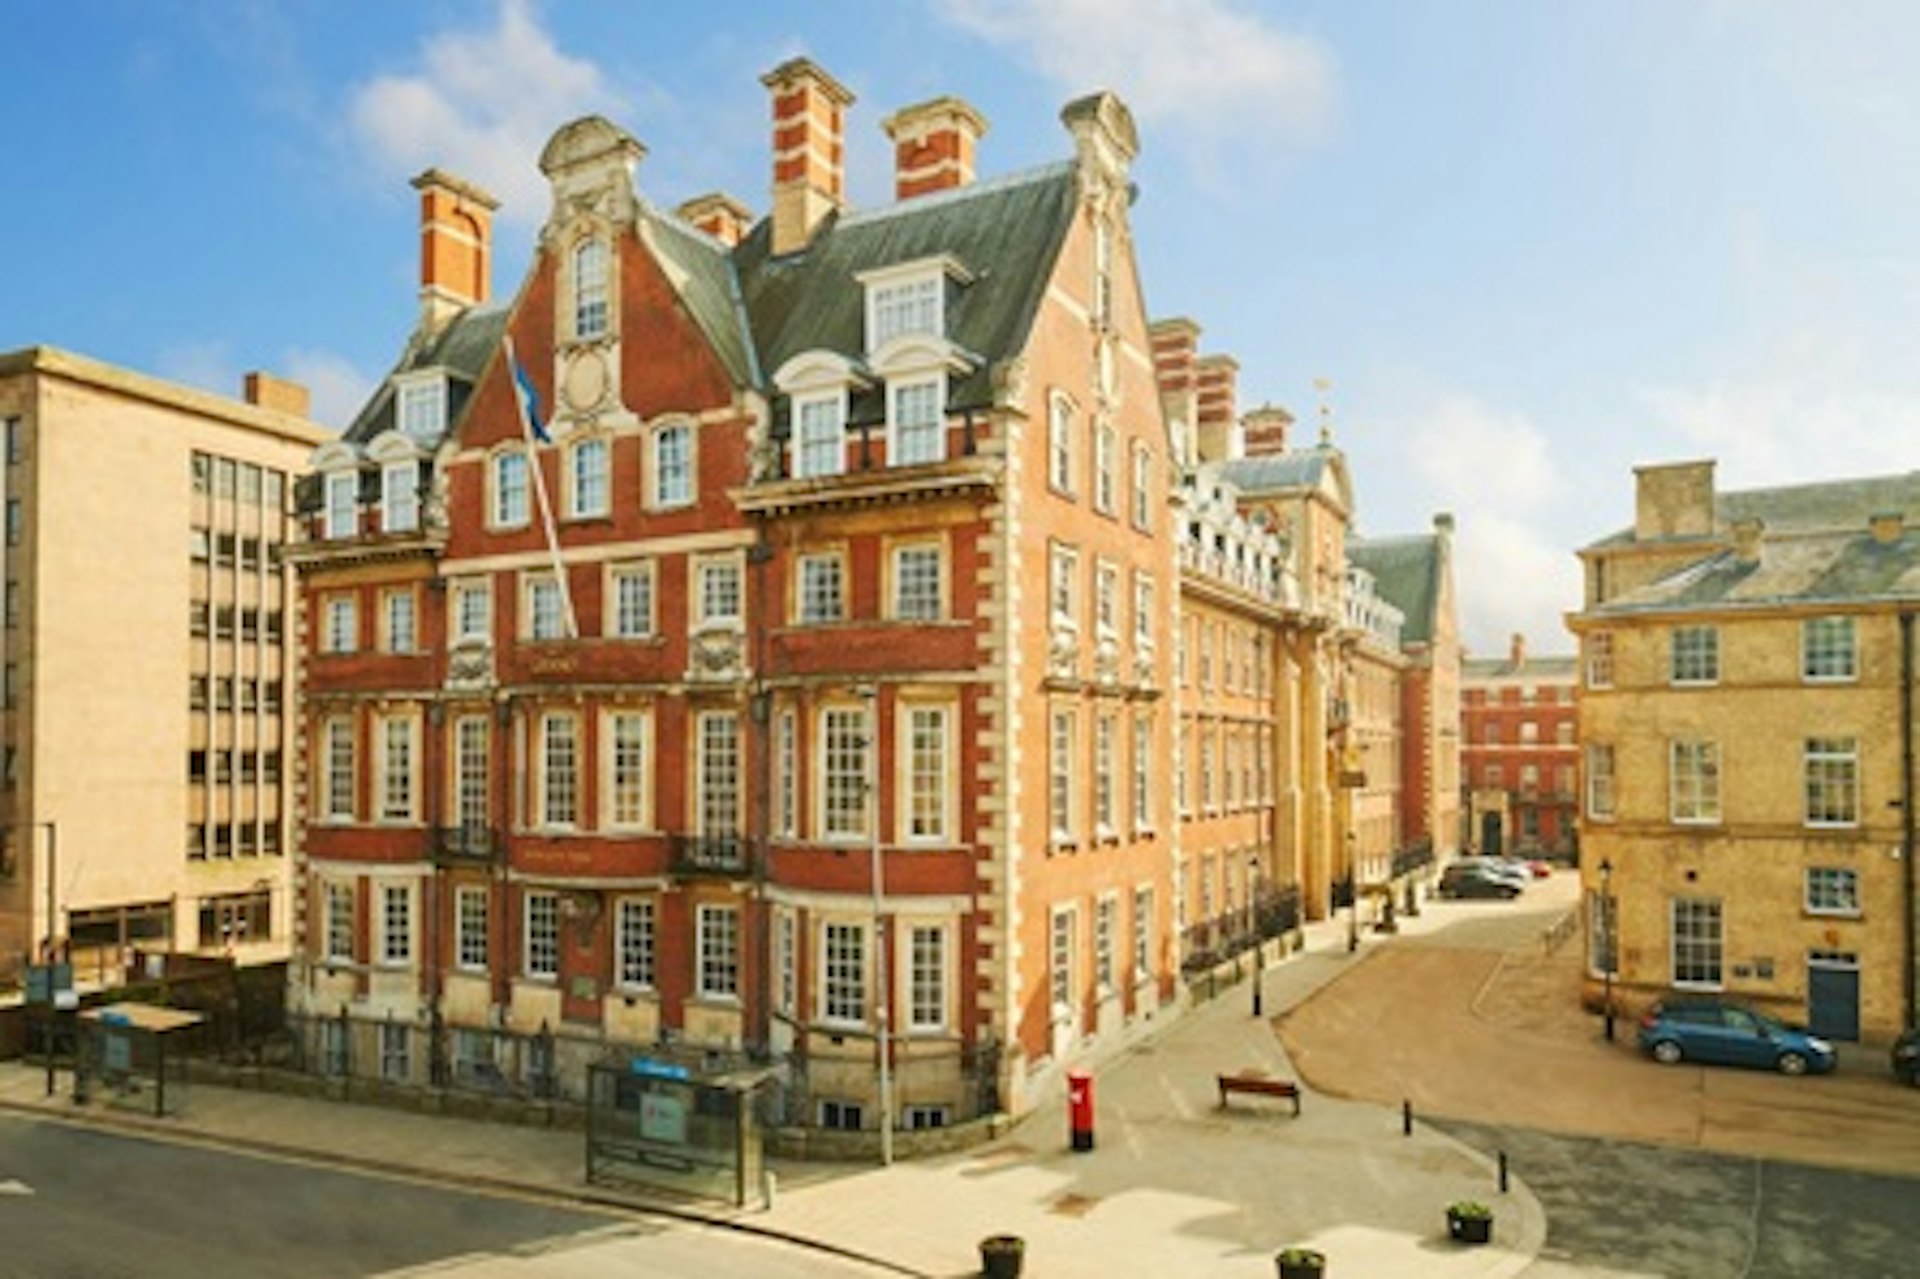 One Night Luxury Spa Break with Treatment for Two at the 5* Grand Hotel York 2